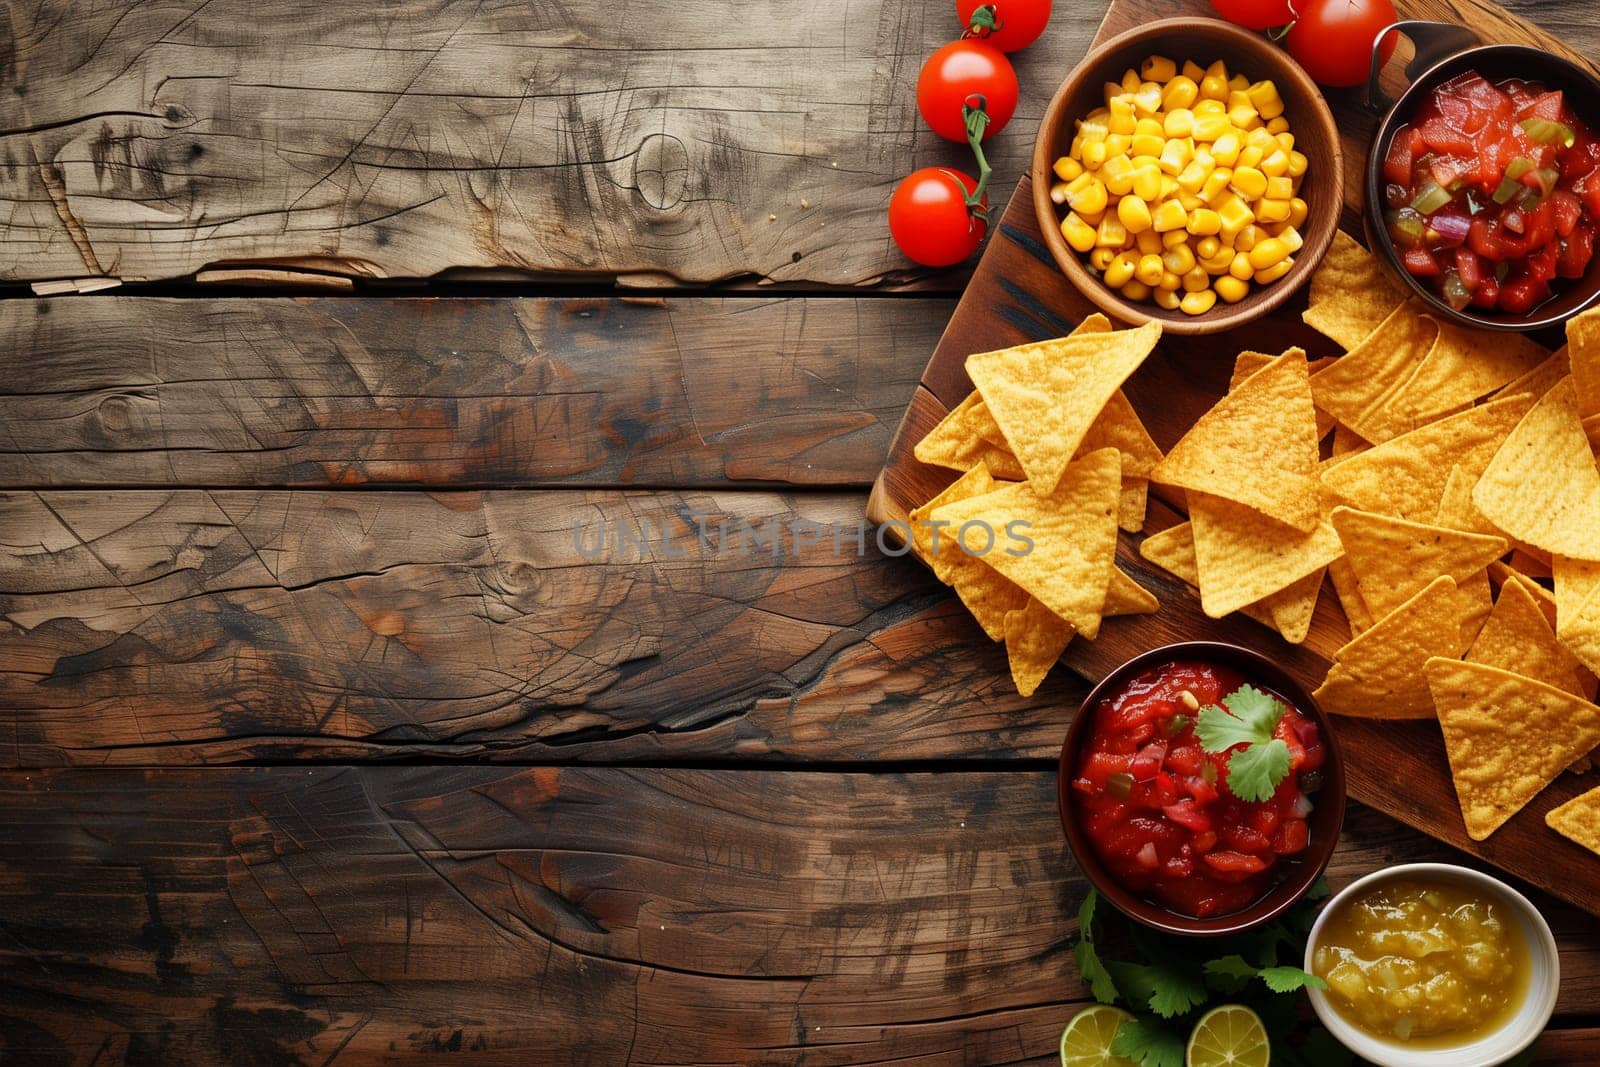 A table covered with bowls of salsa and tortilla chips, ready to serve for a Cinco de Mayo celebration.